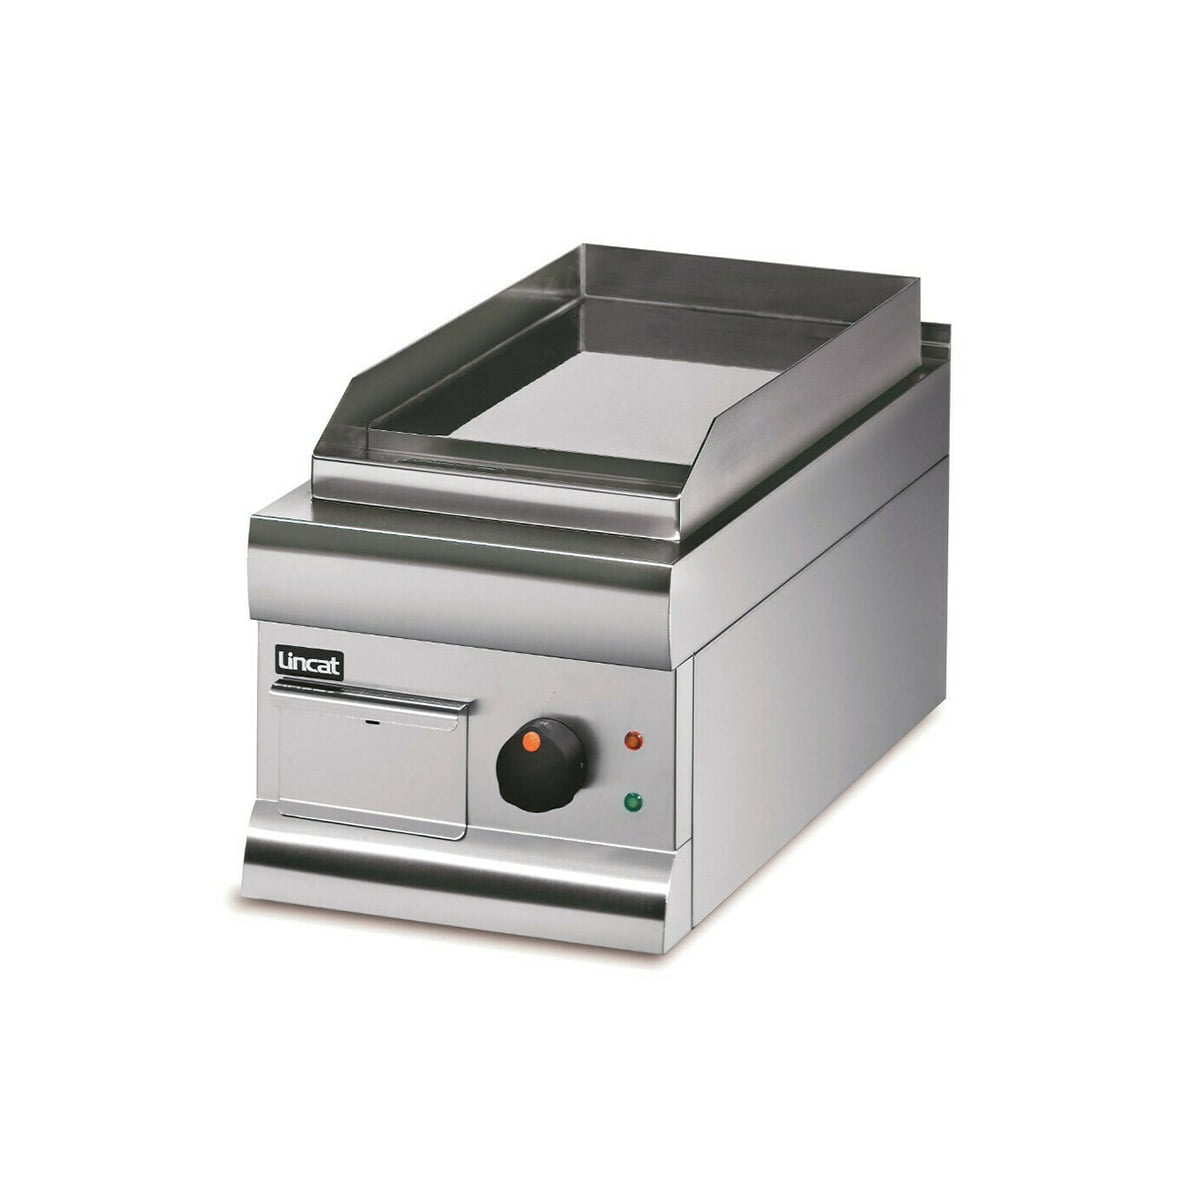 GS3/C – Lincat Silverlink 600 Electric Counter-top Griddle – Chrome Plate – W 300 mm – 2.0 kW